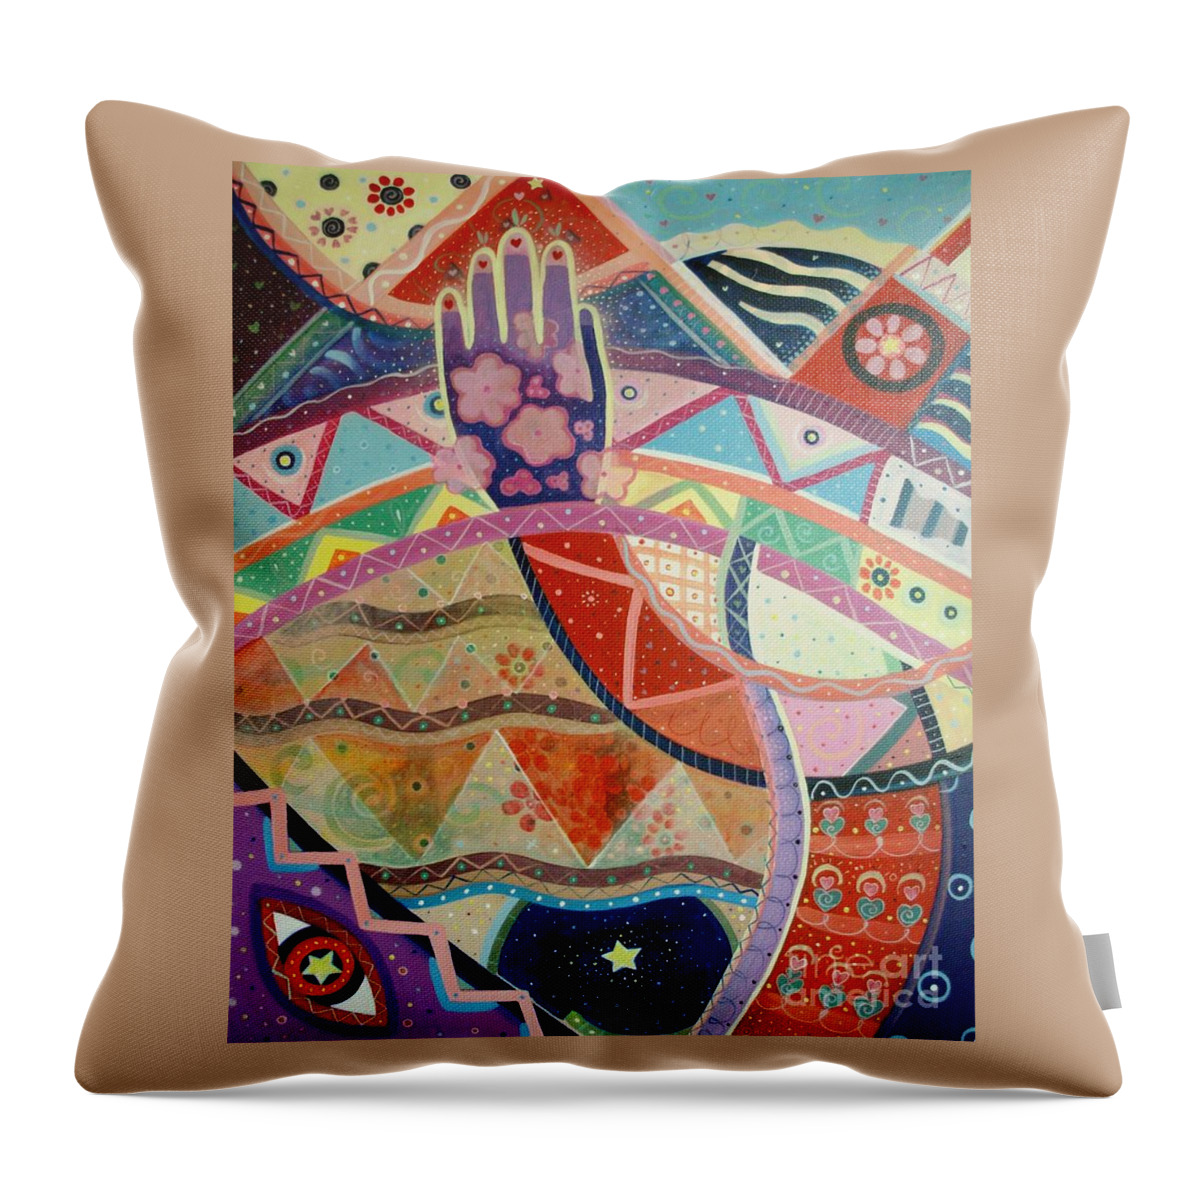 Hand Throw Pillow featuring the painting Aim High by Helena Tiainen